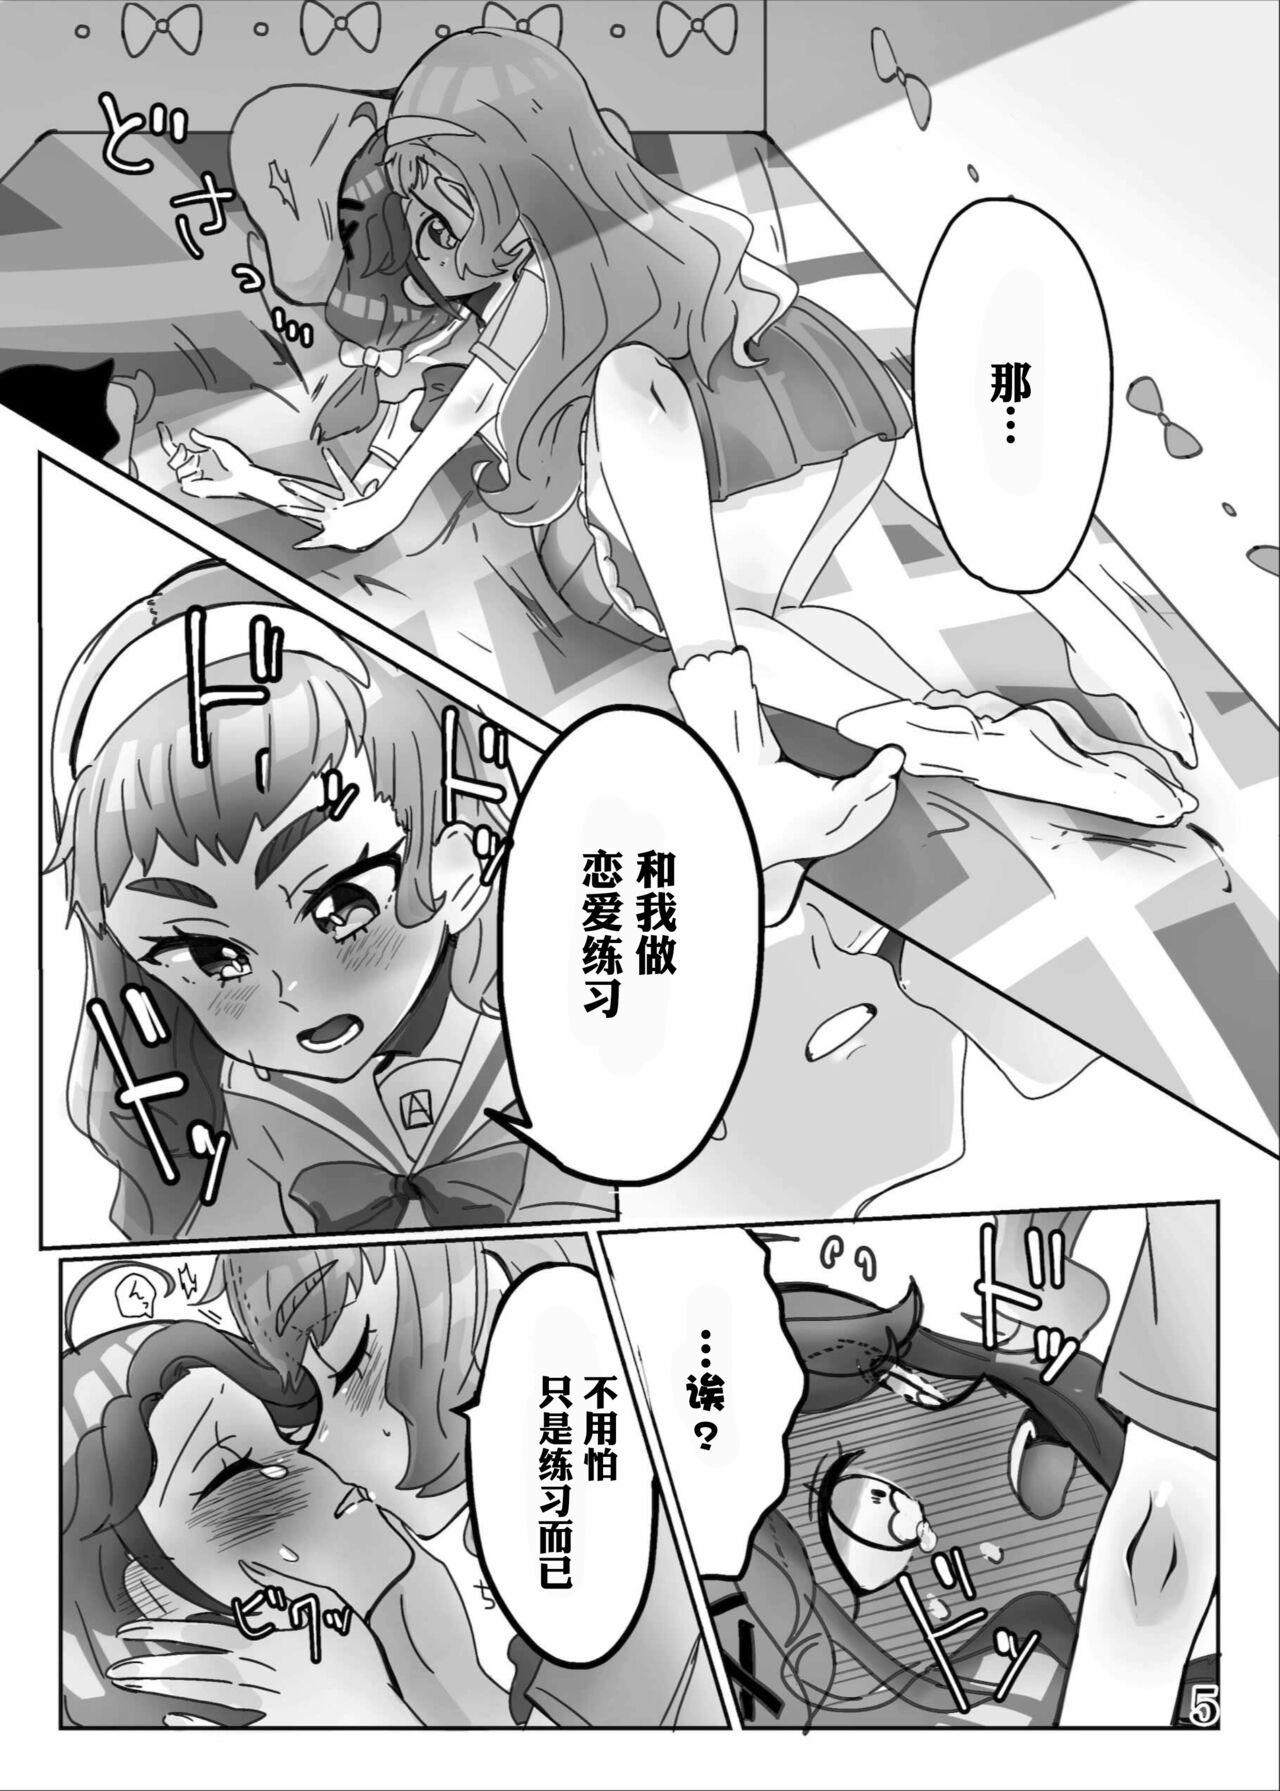 Van yaritaigotone do my best - Pretty cure Tropical rouge precure Cruising - Page 7